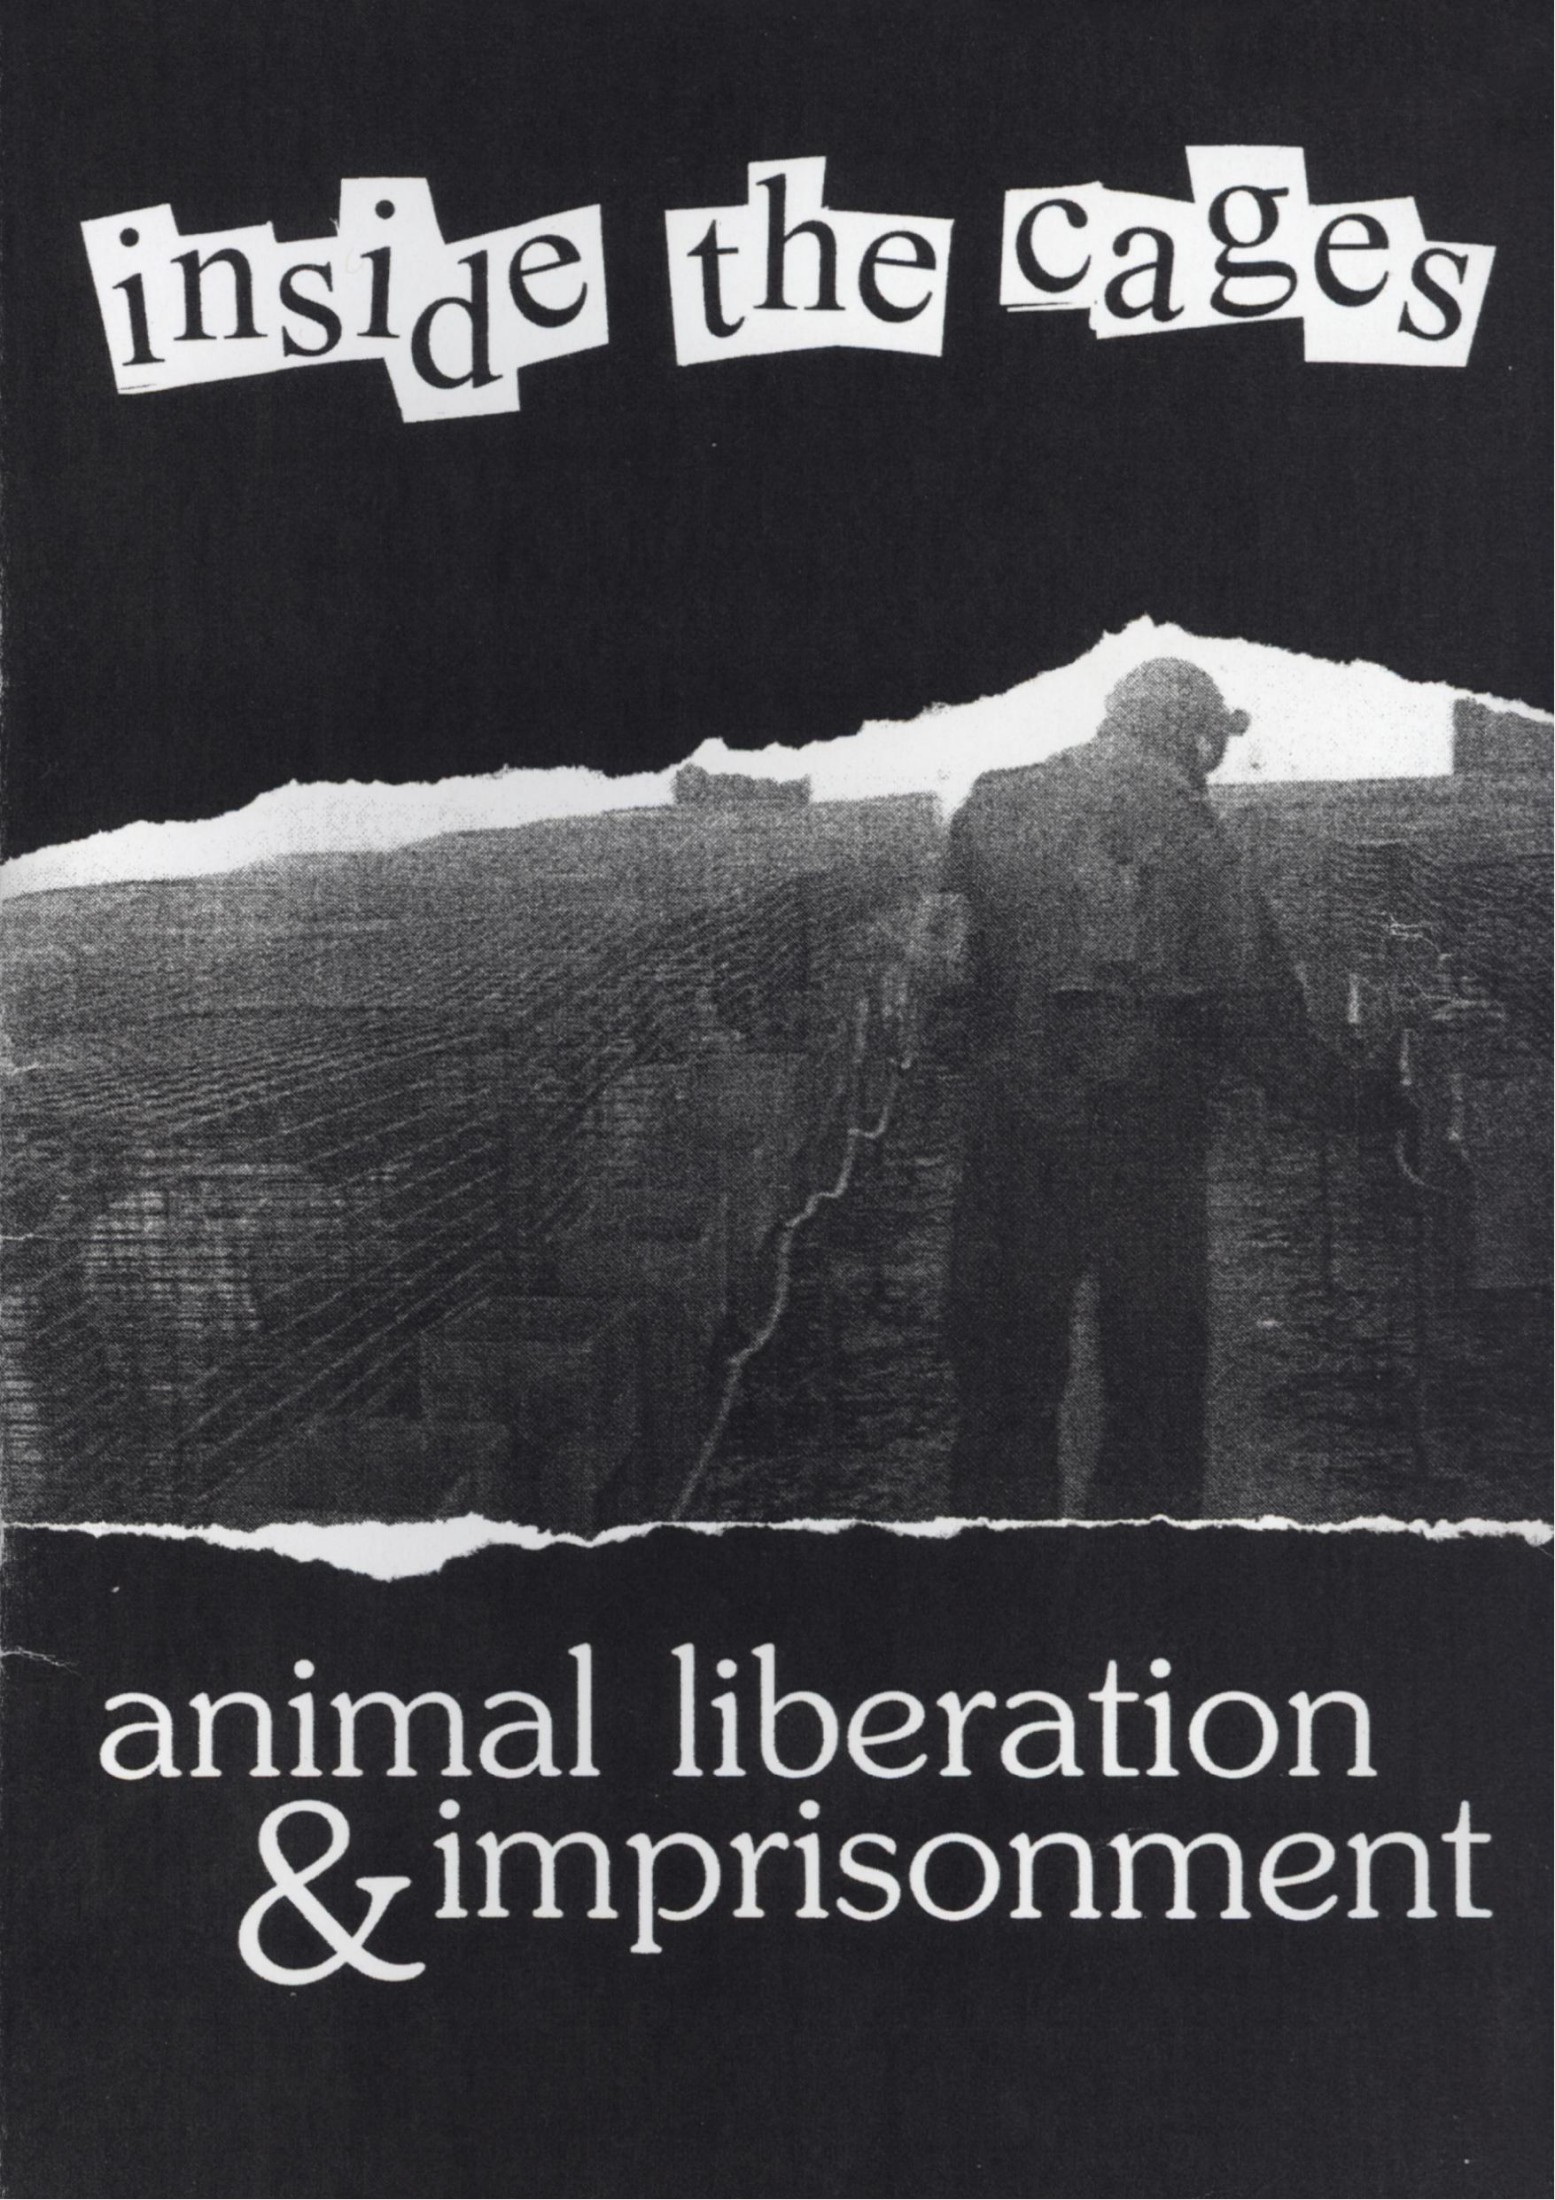 Inside the cages. Animal liberation and imprisonment